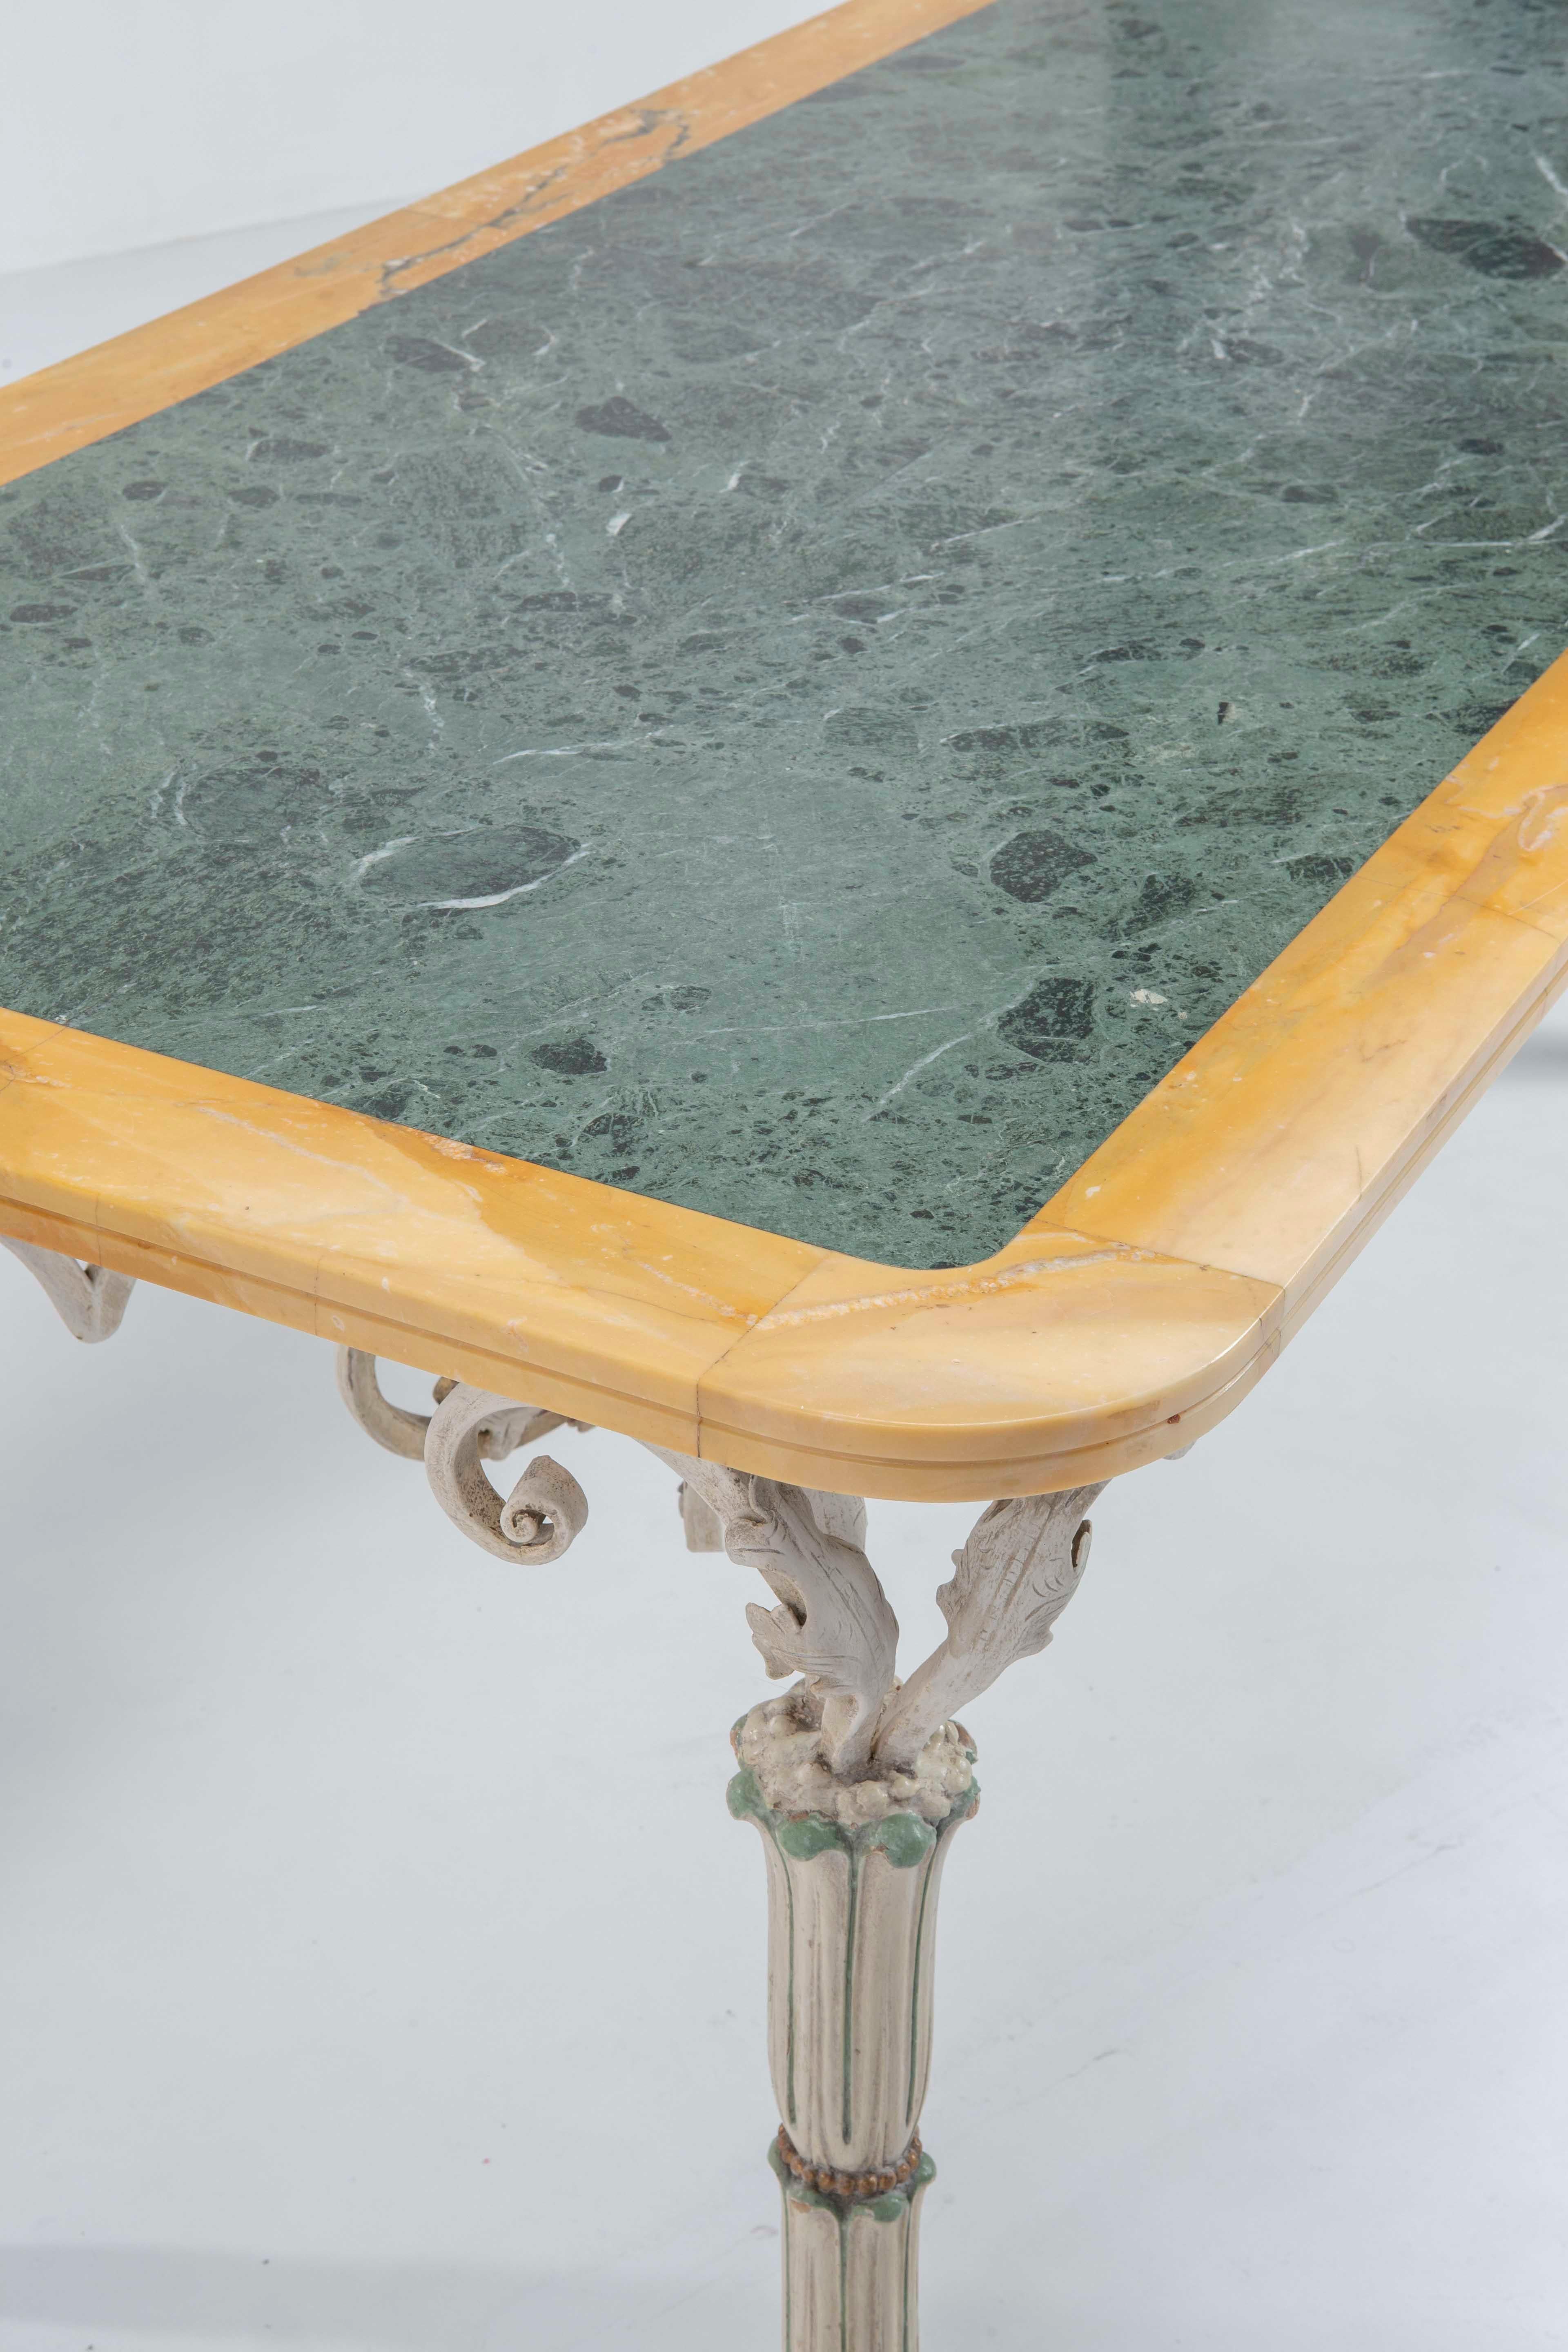 Metal Tomaso Buzzi Marble dining table - 1954 Italian Design from a private commission For Sale